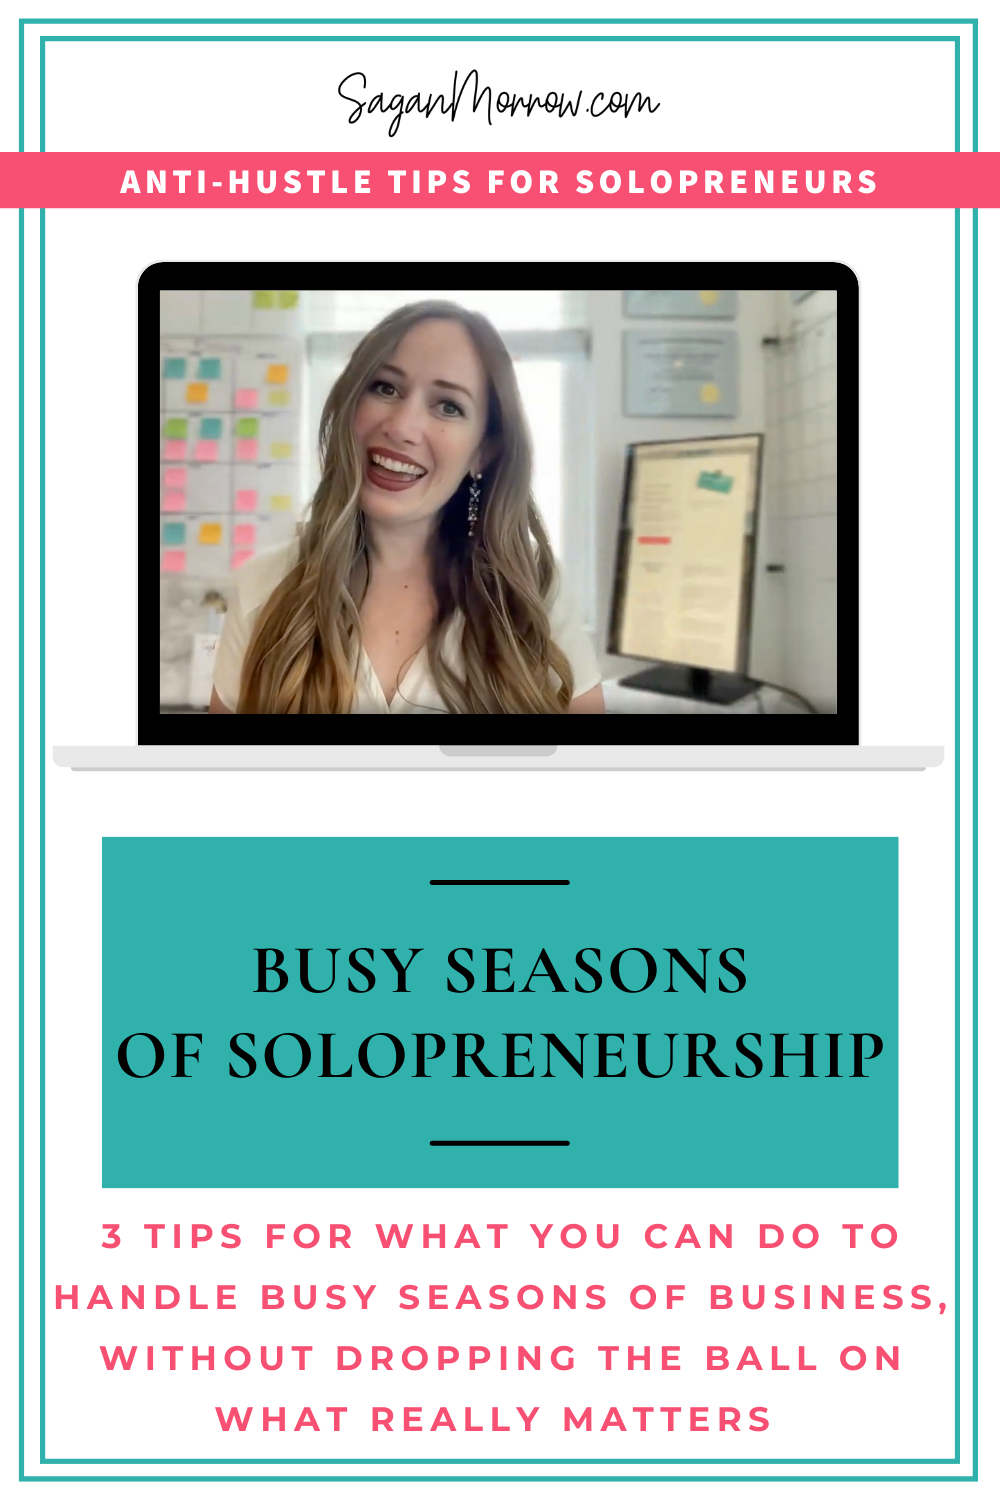 How to handle busy seasons as a solopreneur